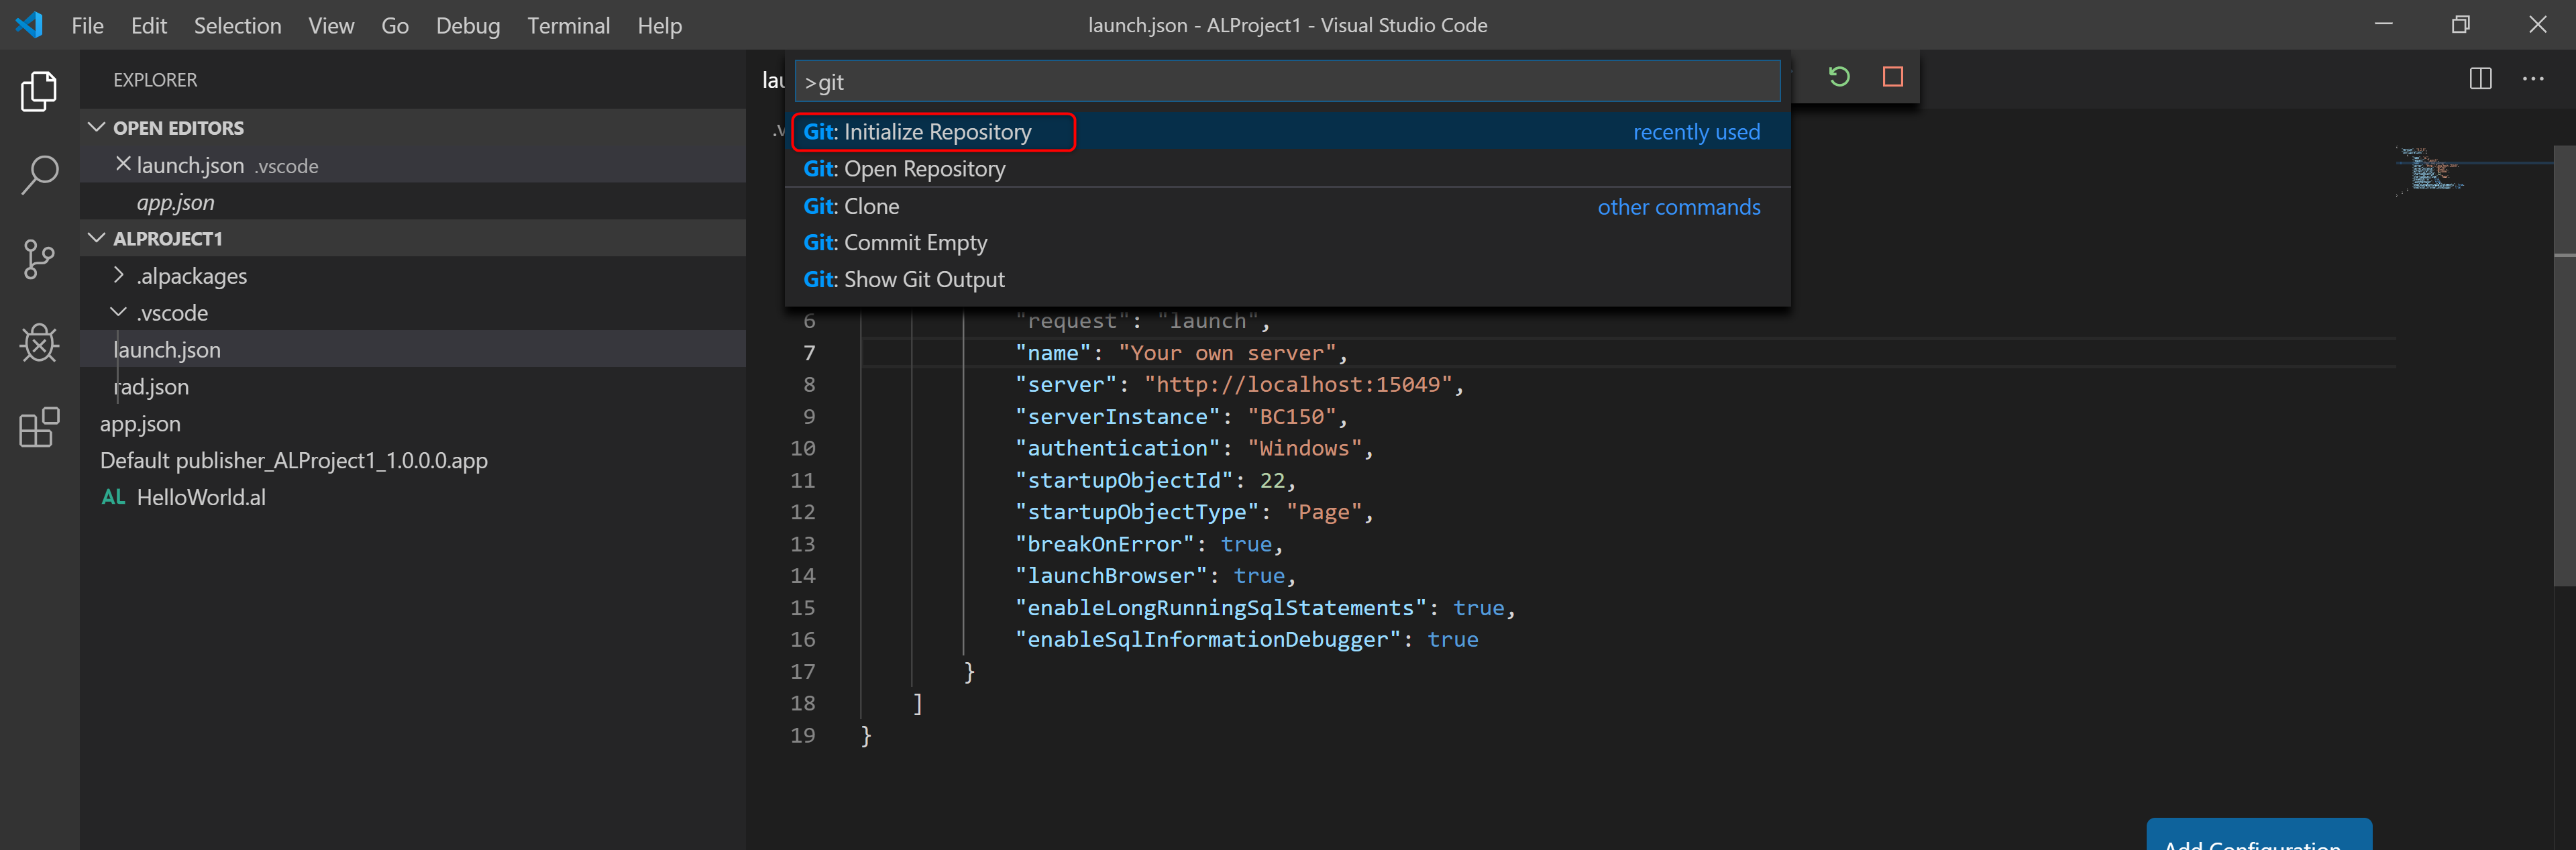 Visual Studio Code - Dynamics 365 Business Central - Git:Intitialize Repository